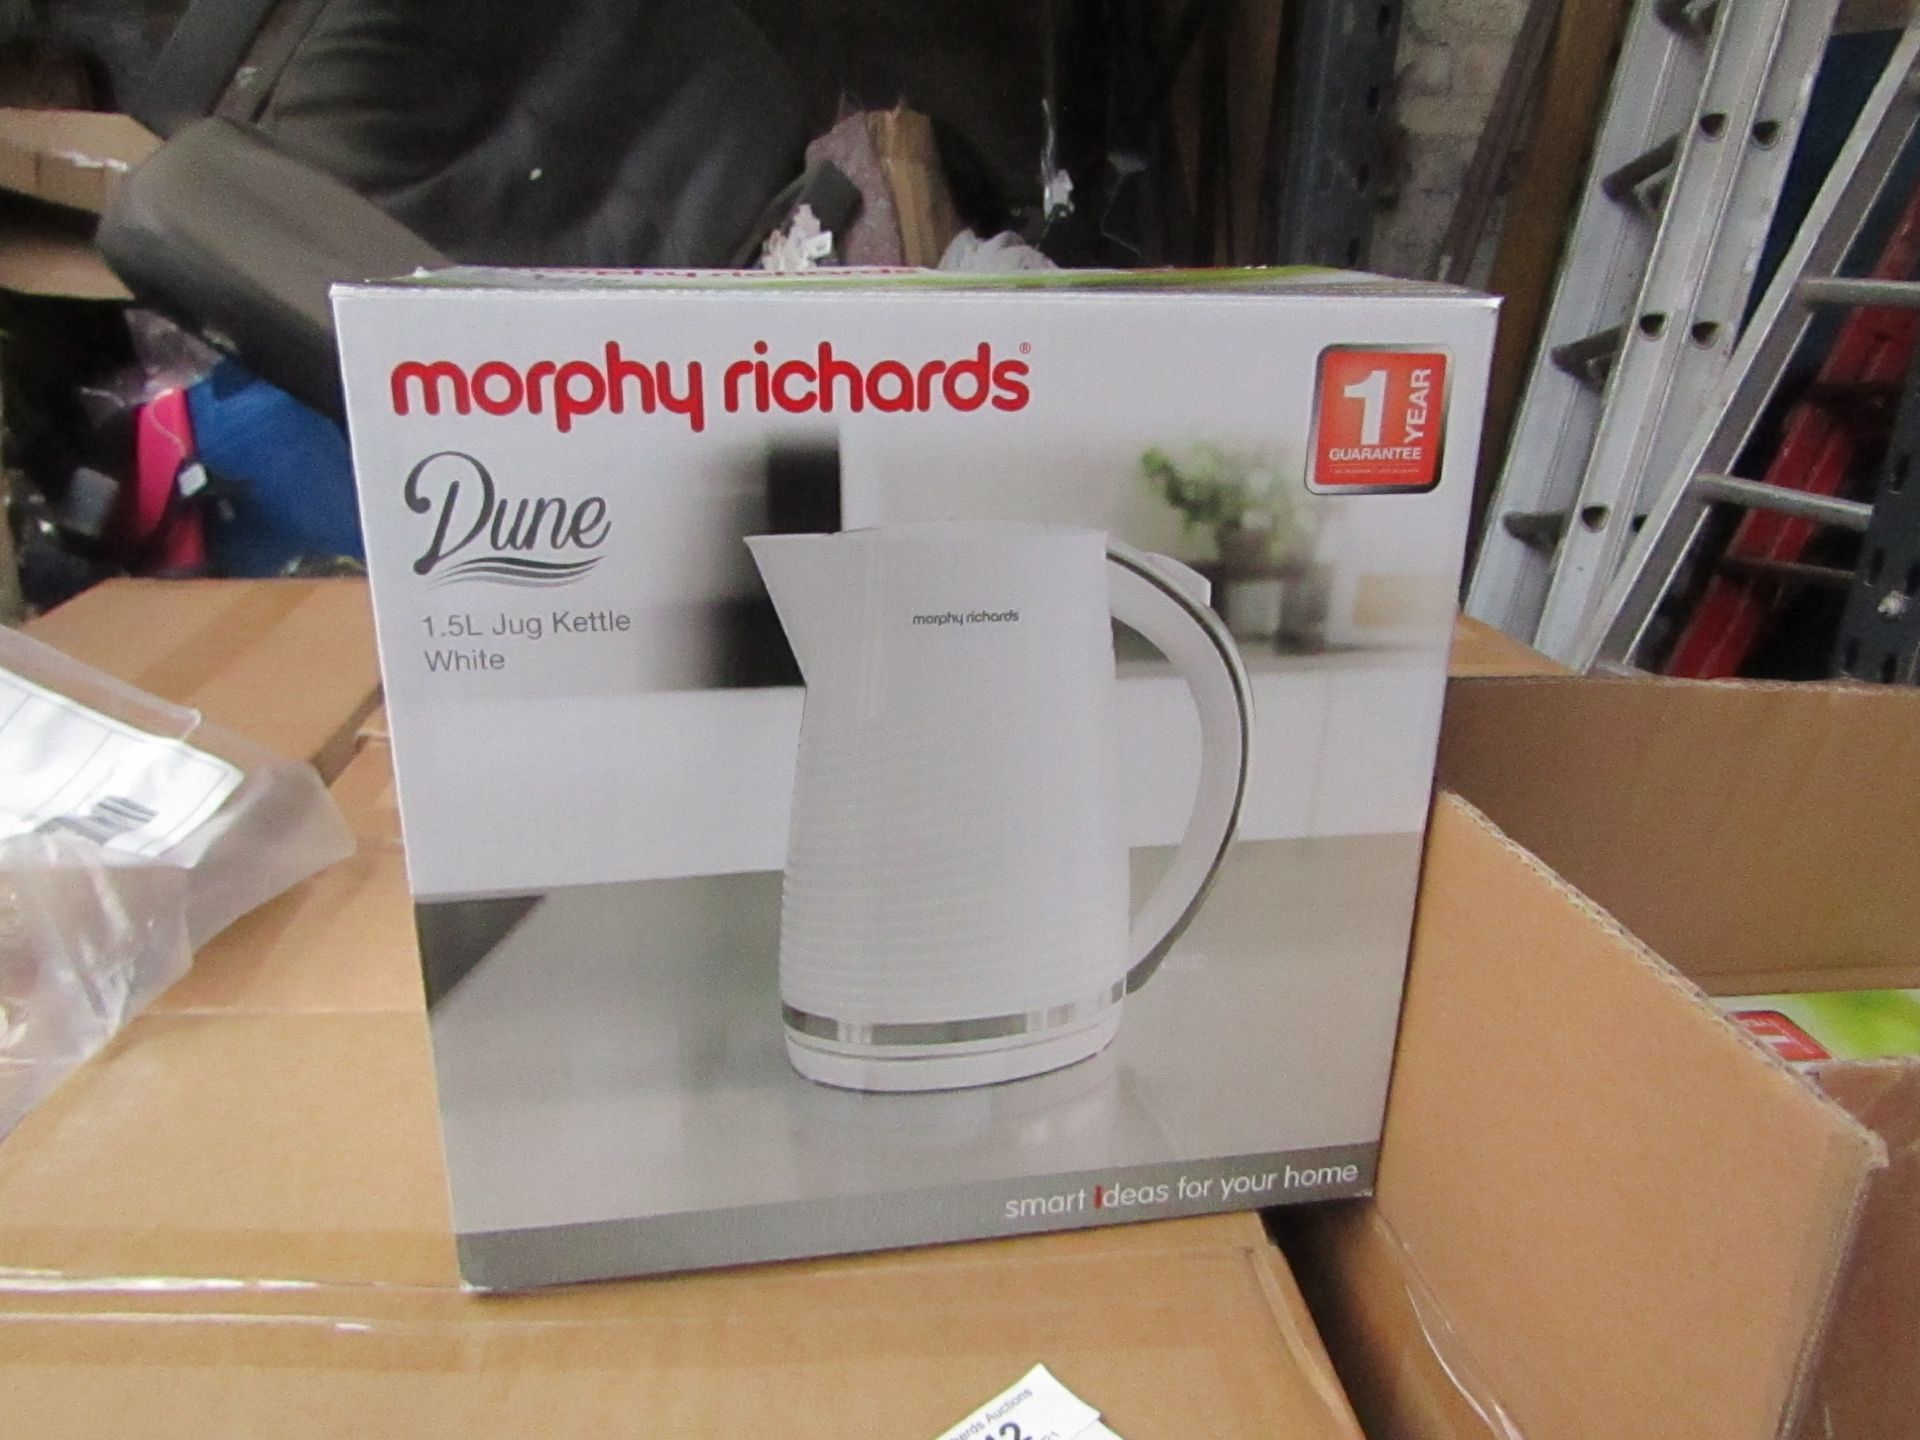 24x Morphy Richards Dune 1.7L white kettle, brand new and boxed. RRP £32.99, total lot RRP £791.76